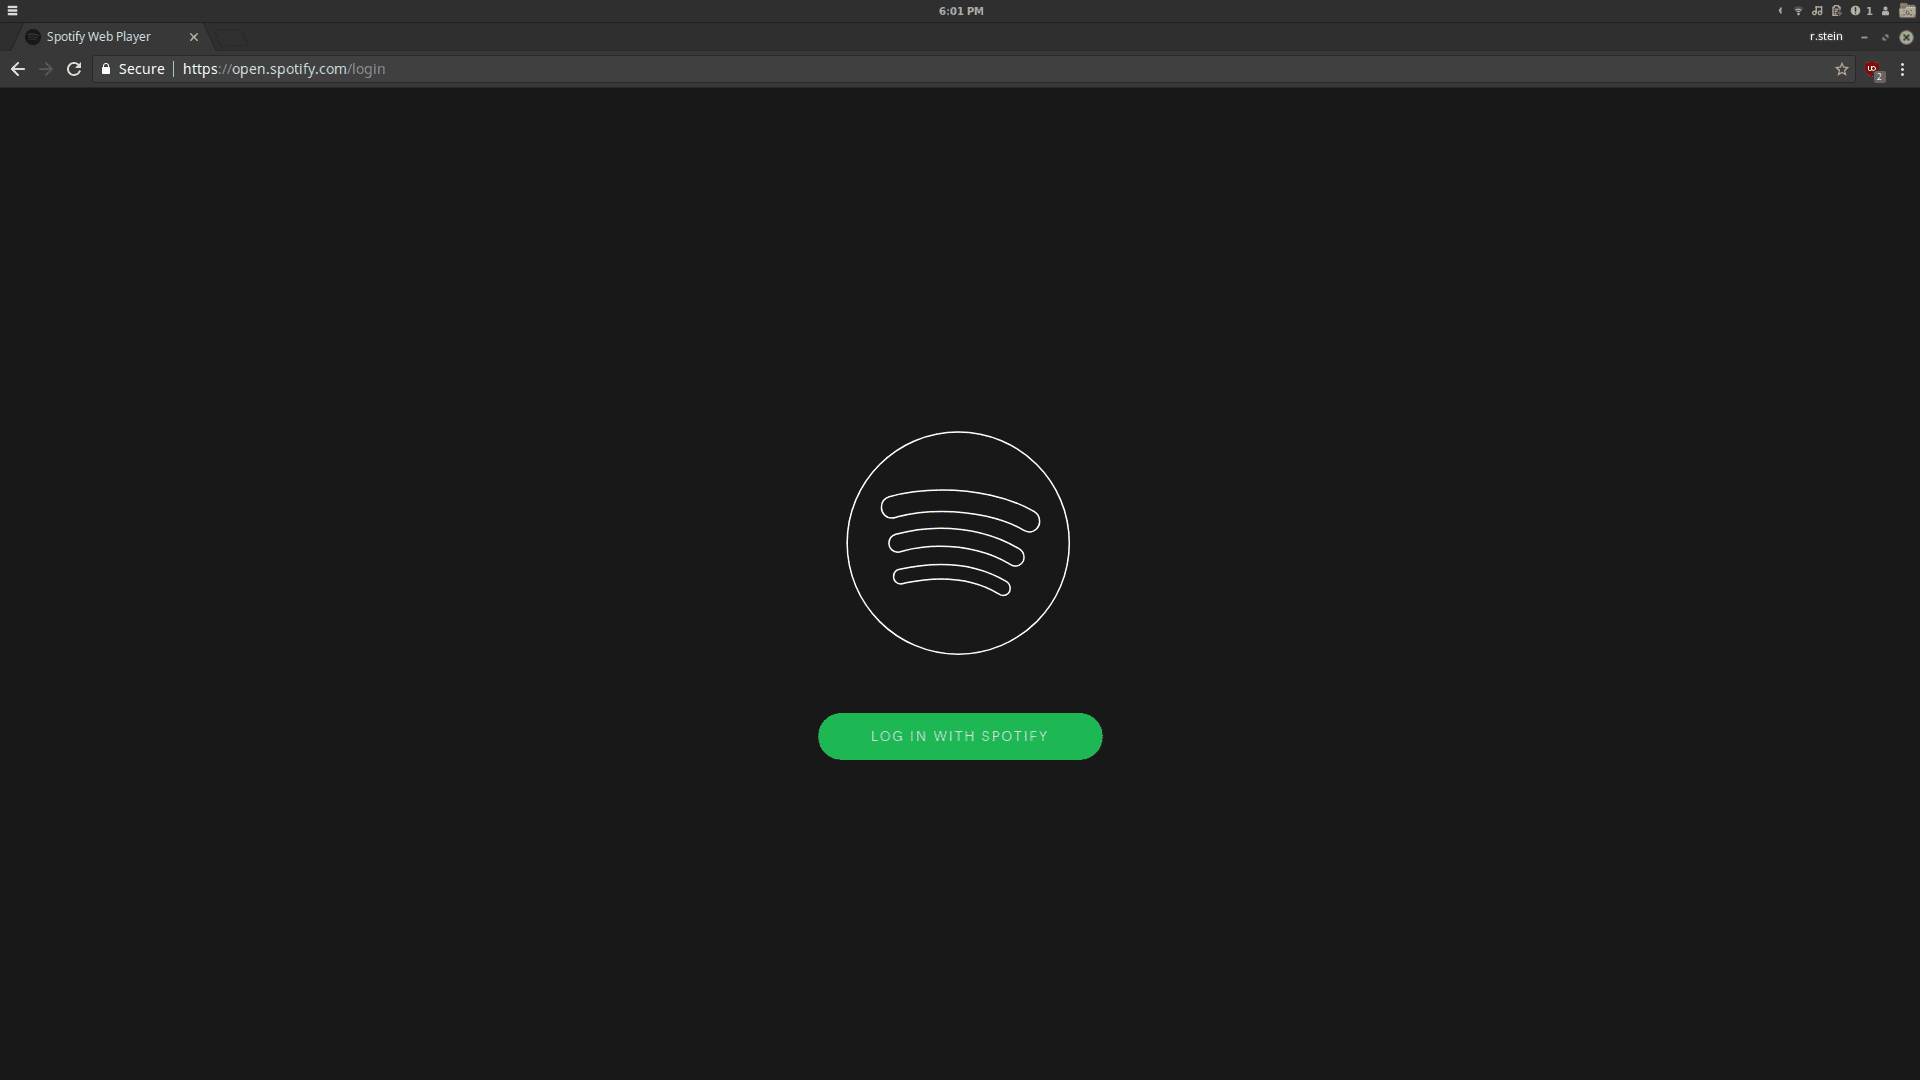 spotify web player android